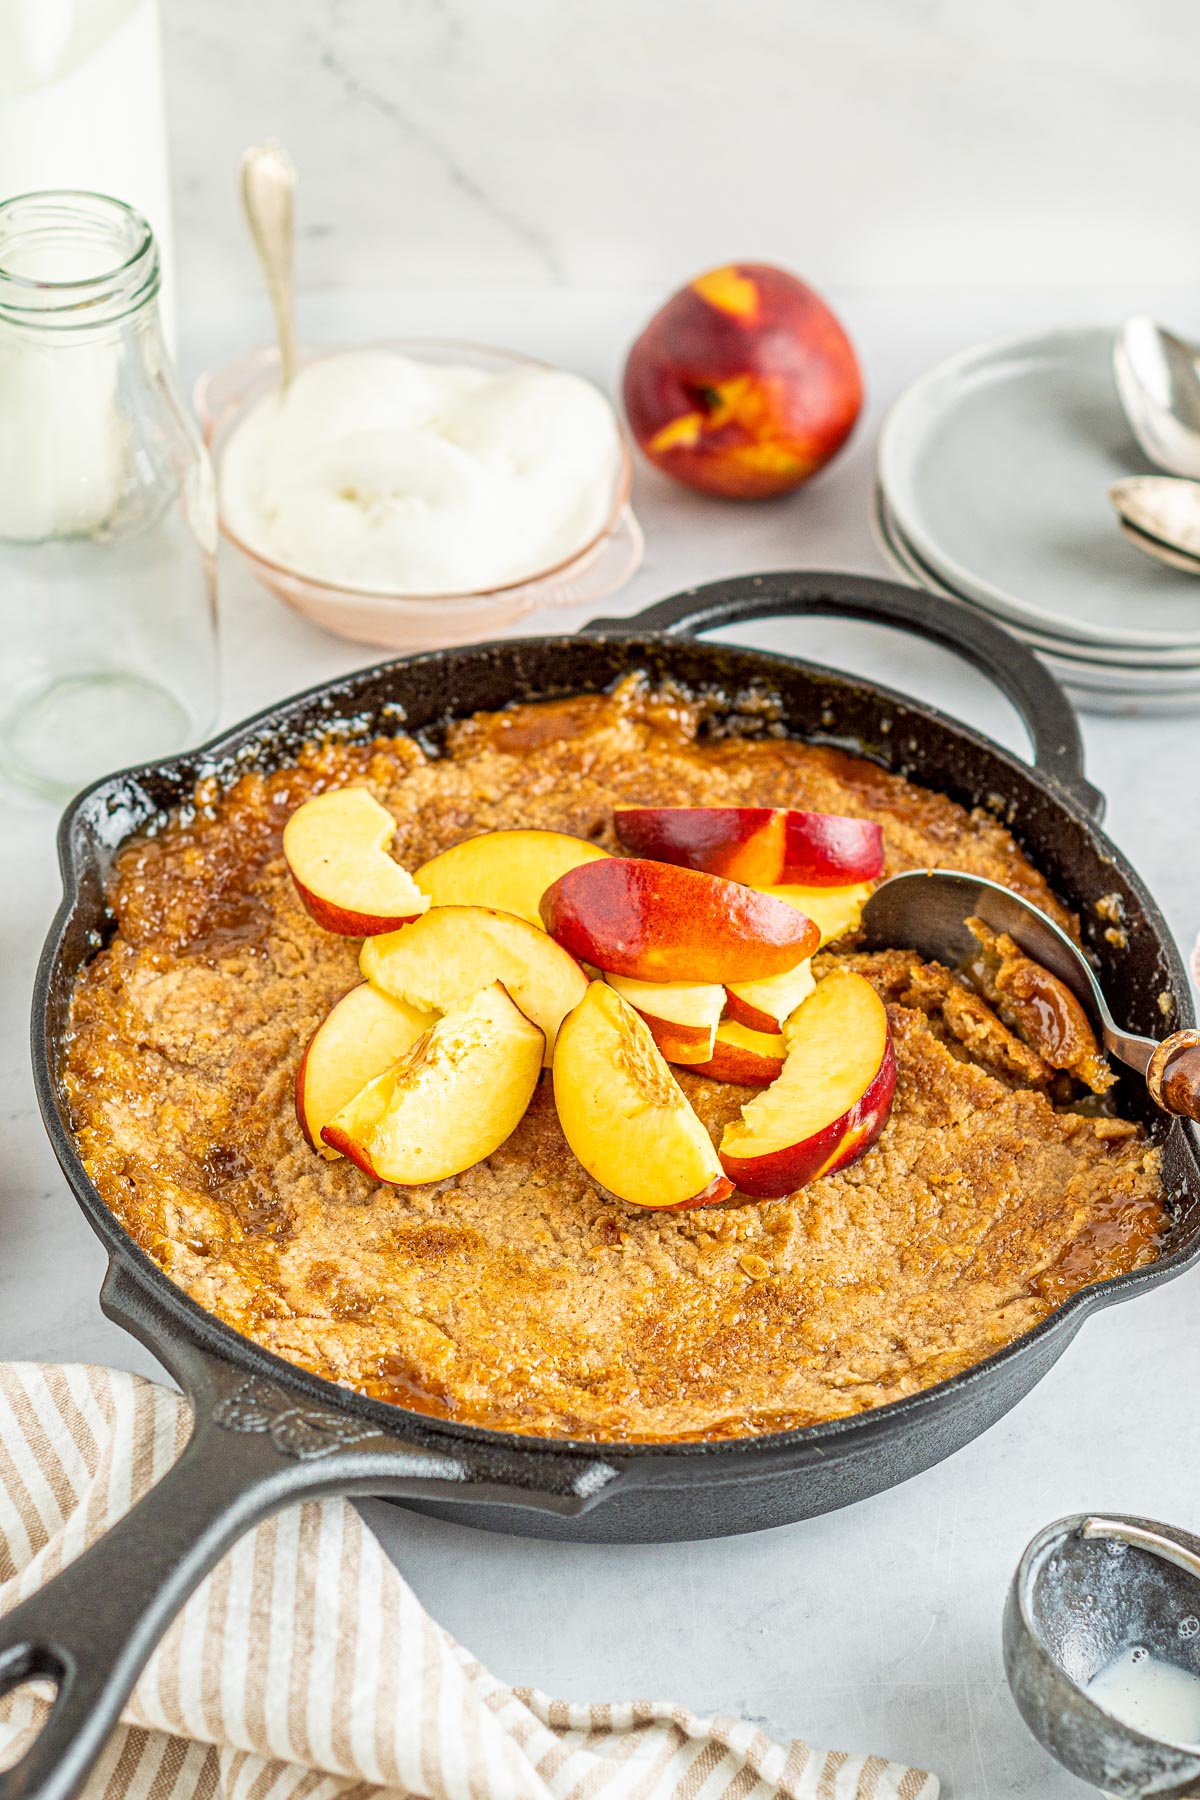 peach cobbler with ice cream, plates, spoons, and fresh peaches